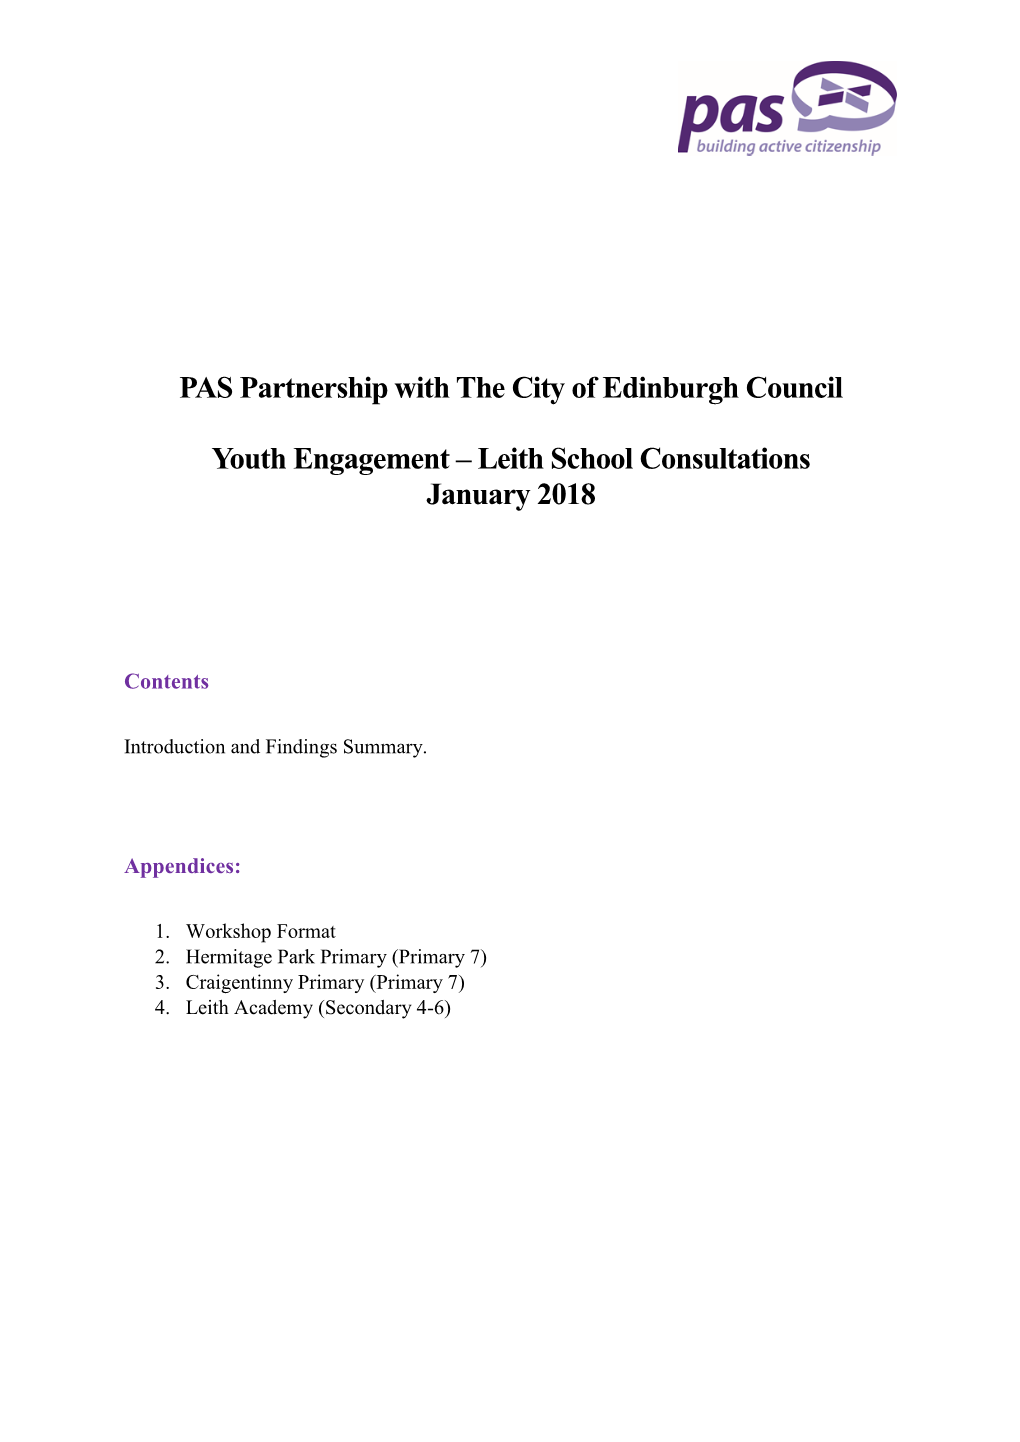 PAS Partnership with the City of Edinburgh Council Youth